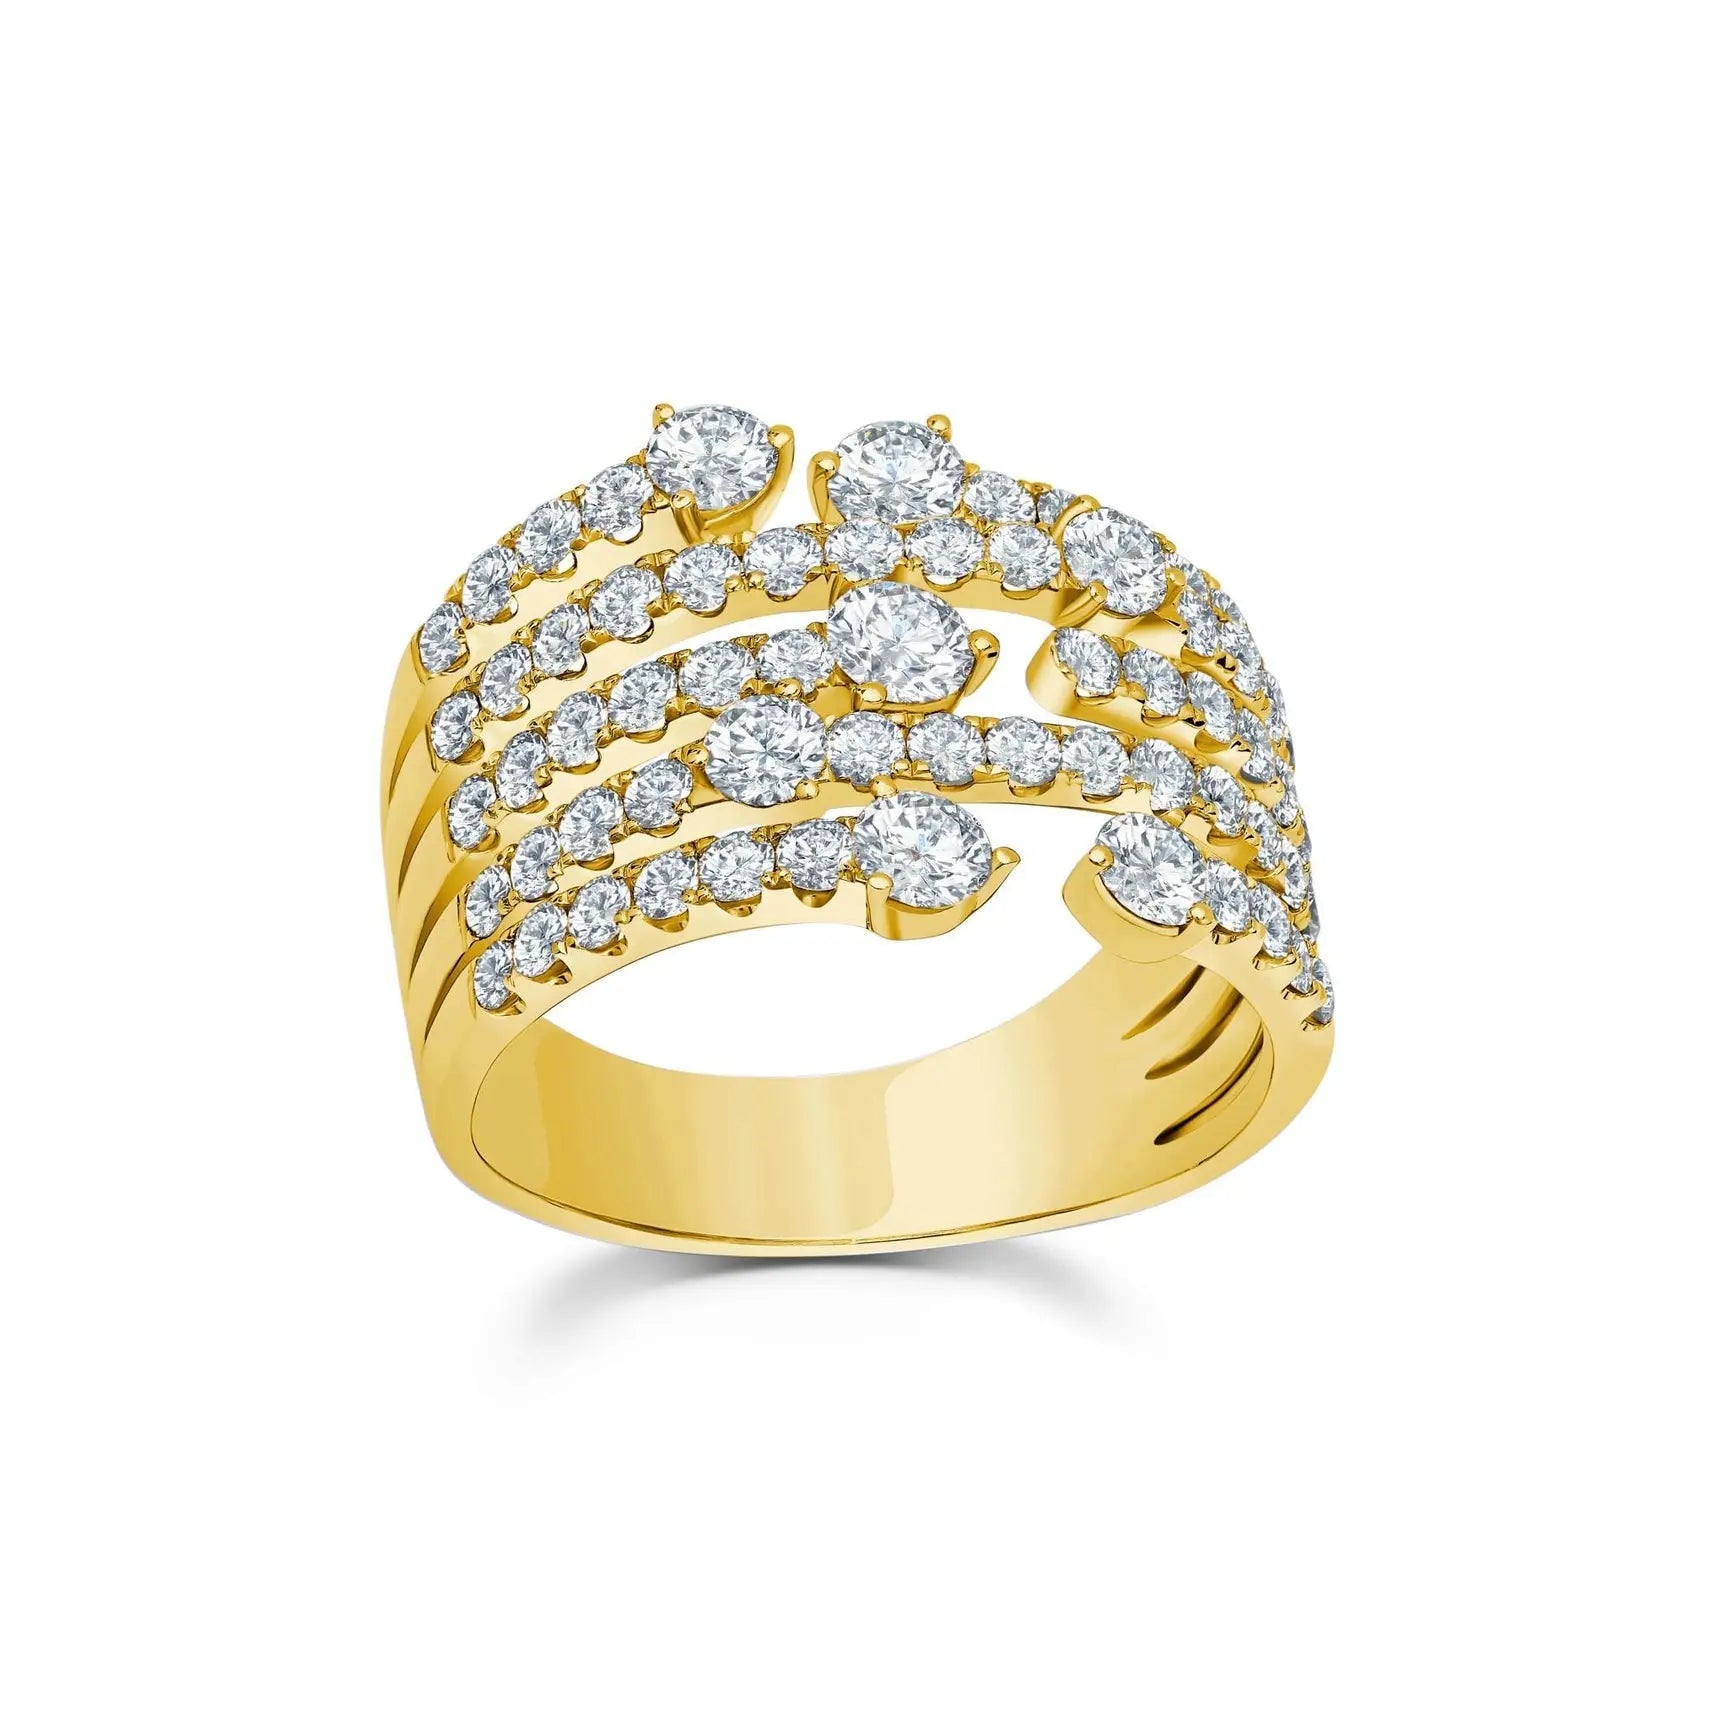 18K yellow gold with 2.09 carats of brilliant white diamonds  Details:   Gemstone:  2.09 Carats of G-H Color White Diamonds Metal: 18K Gold, 7.11 Grams Sizing:  Resizable  Ring Size 7  If you need a different size, please email shop@sbvail.com  Designed by Graziela Gems